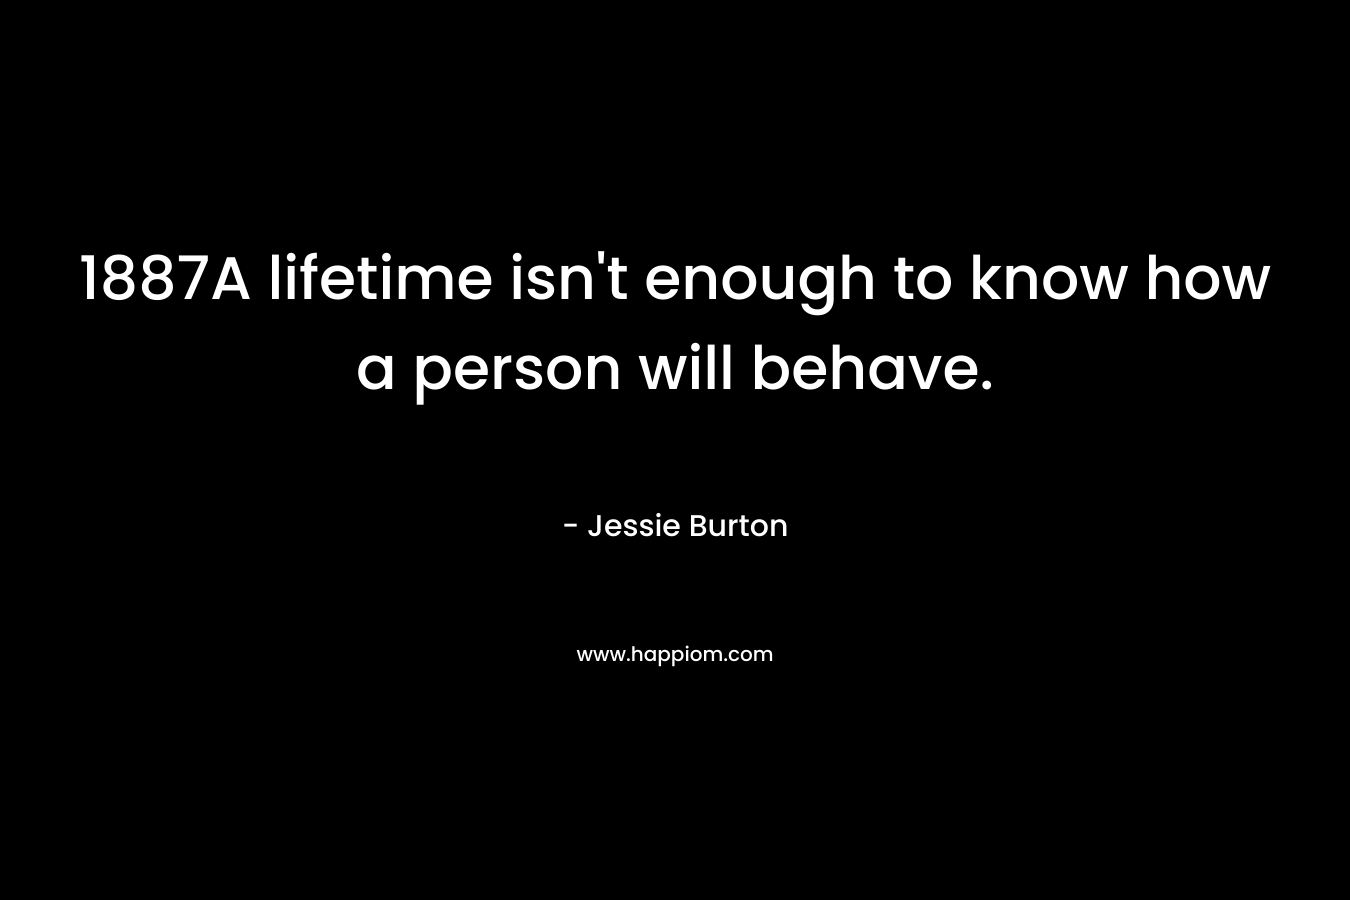 1887A lifetime isn’t enough to know how a person will behave. – Jessie Burton